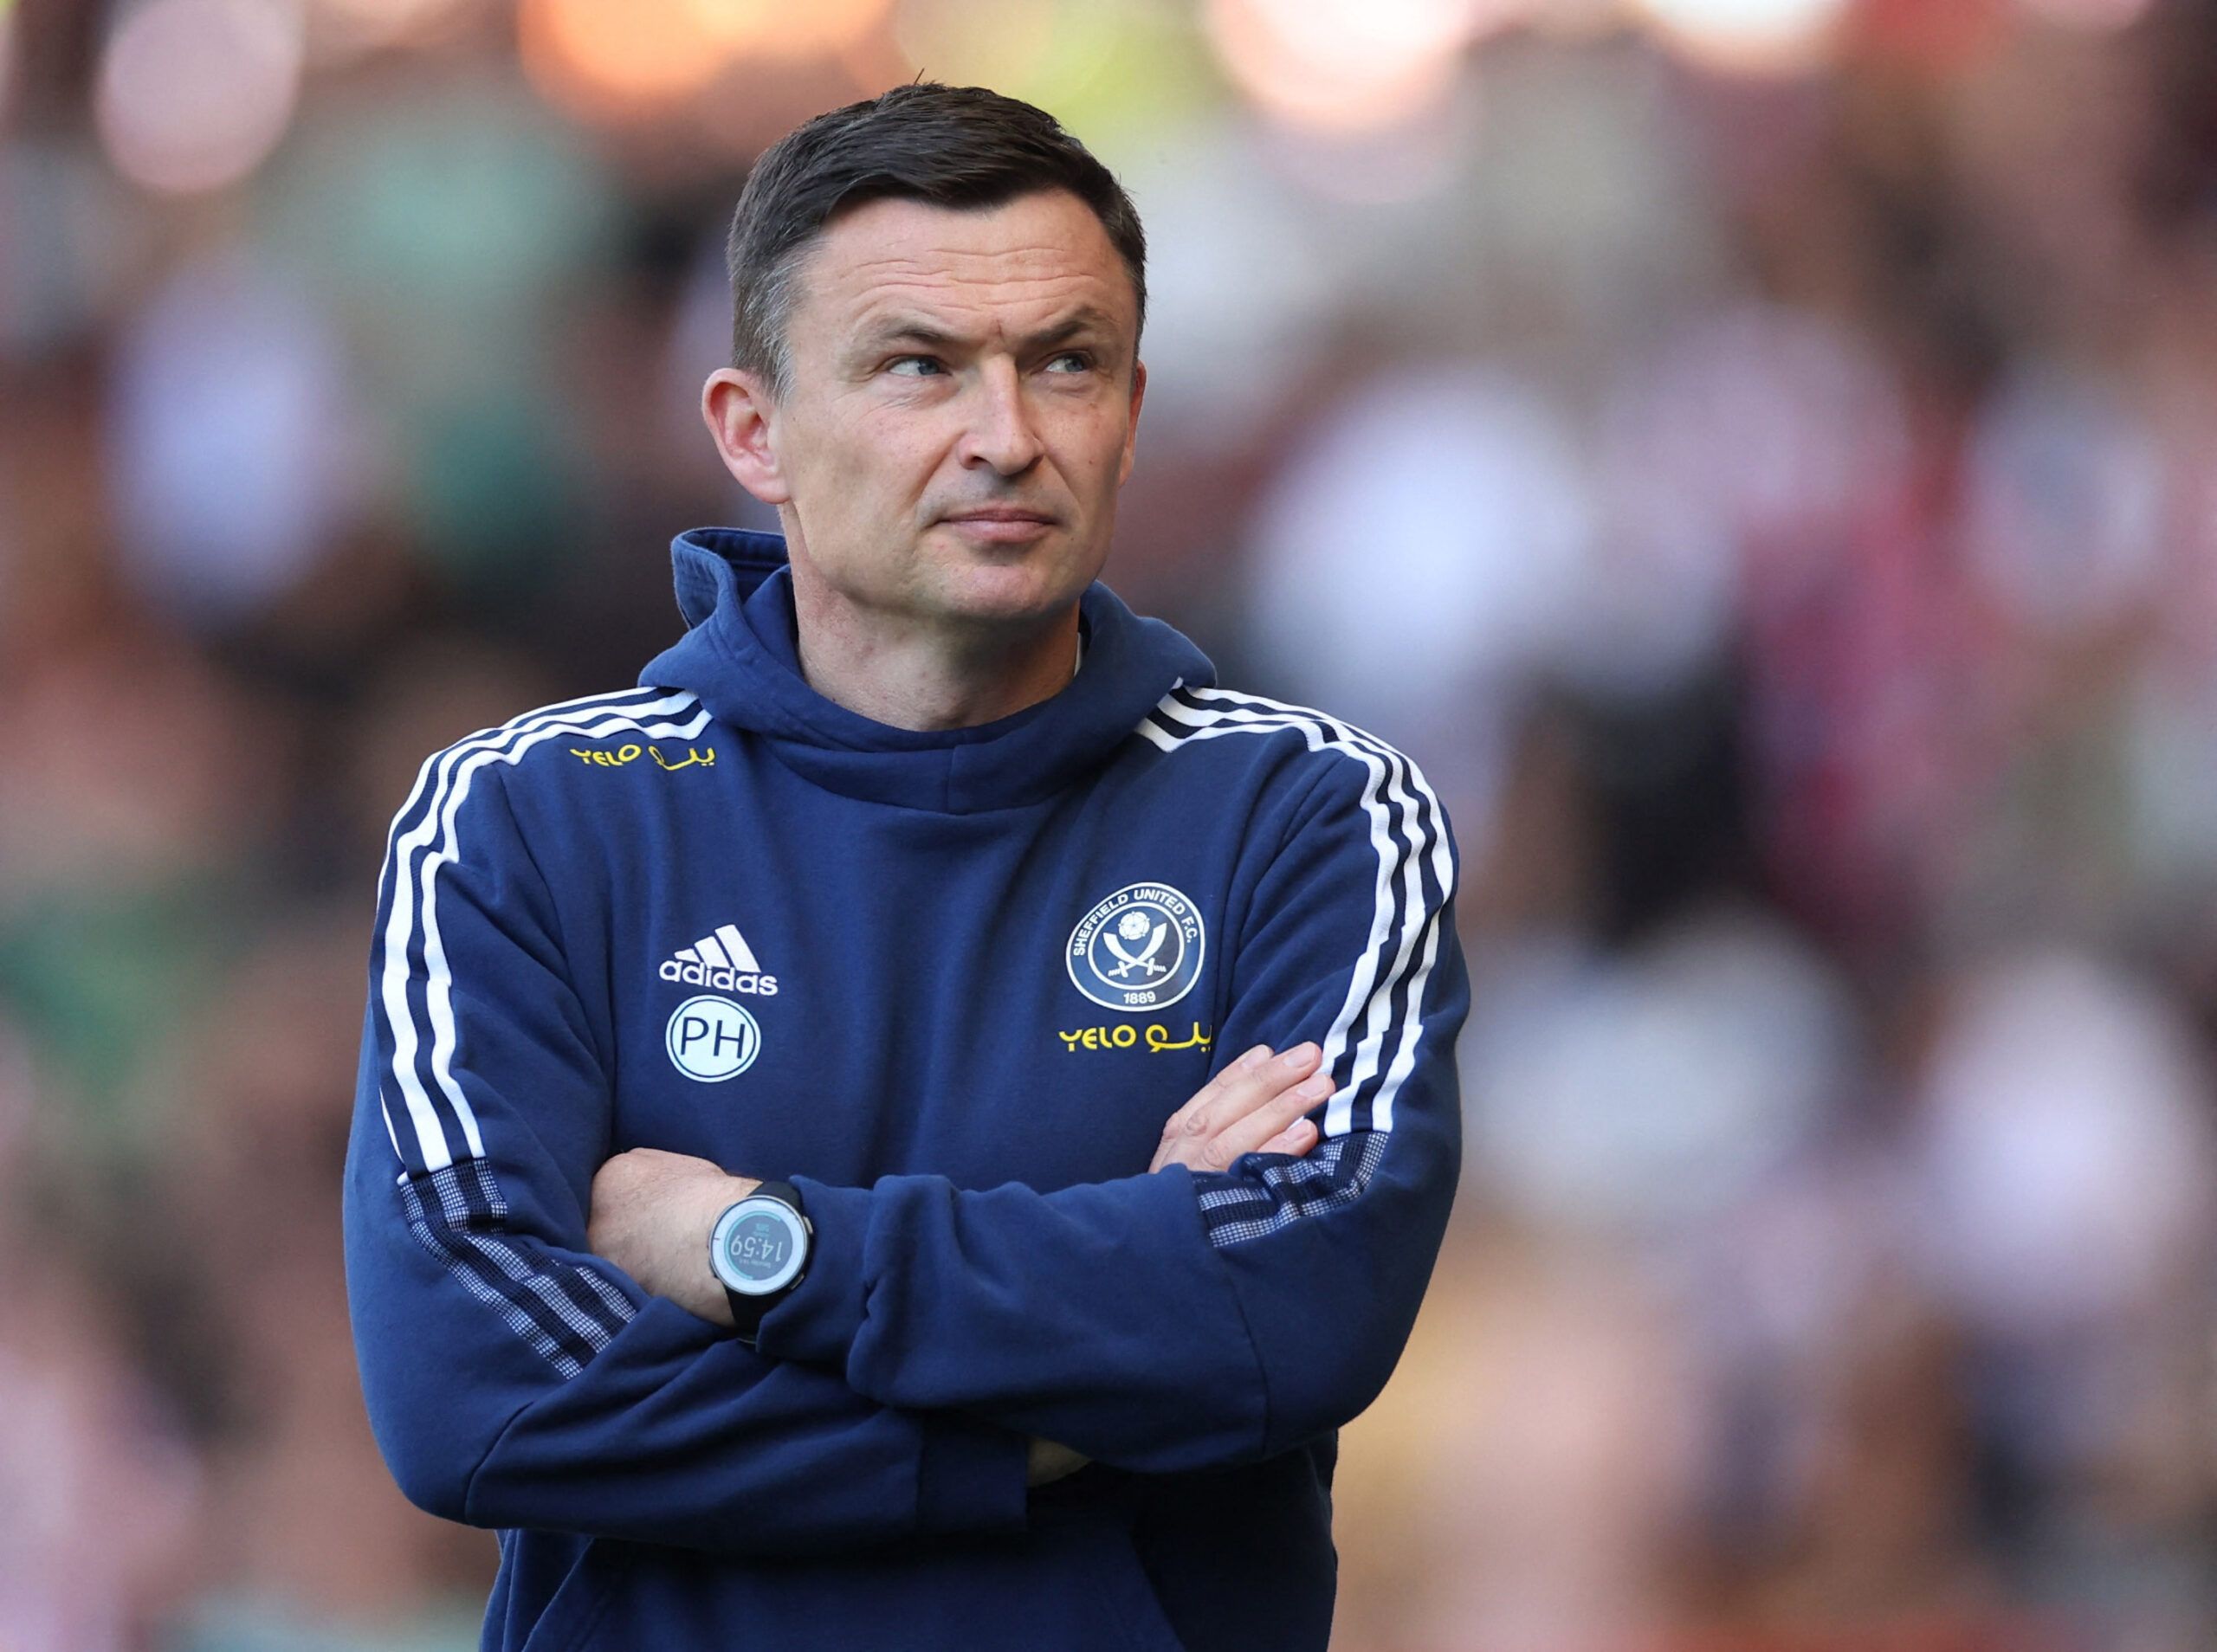 Soccer Football - Championship - Semi Final - First Leg - Sheffield United v Nottingham Forest - Bramall Lane, Sheffield, Britain - May 14, 2022 Sheffield United manager Paul Heckingbottom before the match Action Images via Reuters/Carl Recine EDITORIAL USE ONLY. No use with unauthorized audio, video, data, fixture lists, club/league logos or 'live' services. Online in-match use limited to 75 images, no video emulation. No use in betting, games or single club /league/player publications.  Please